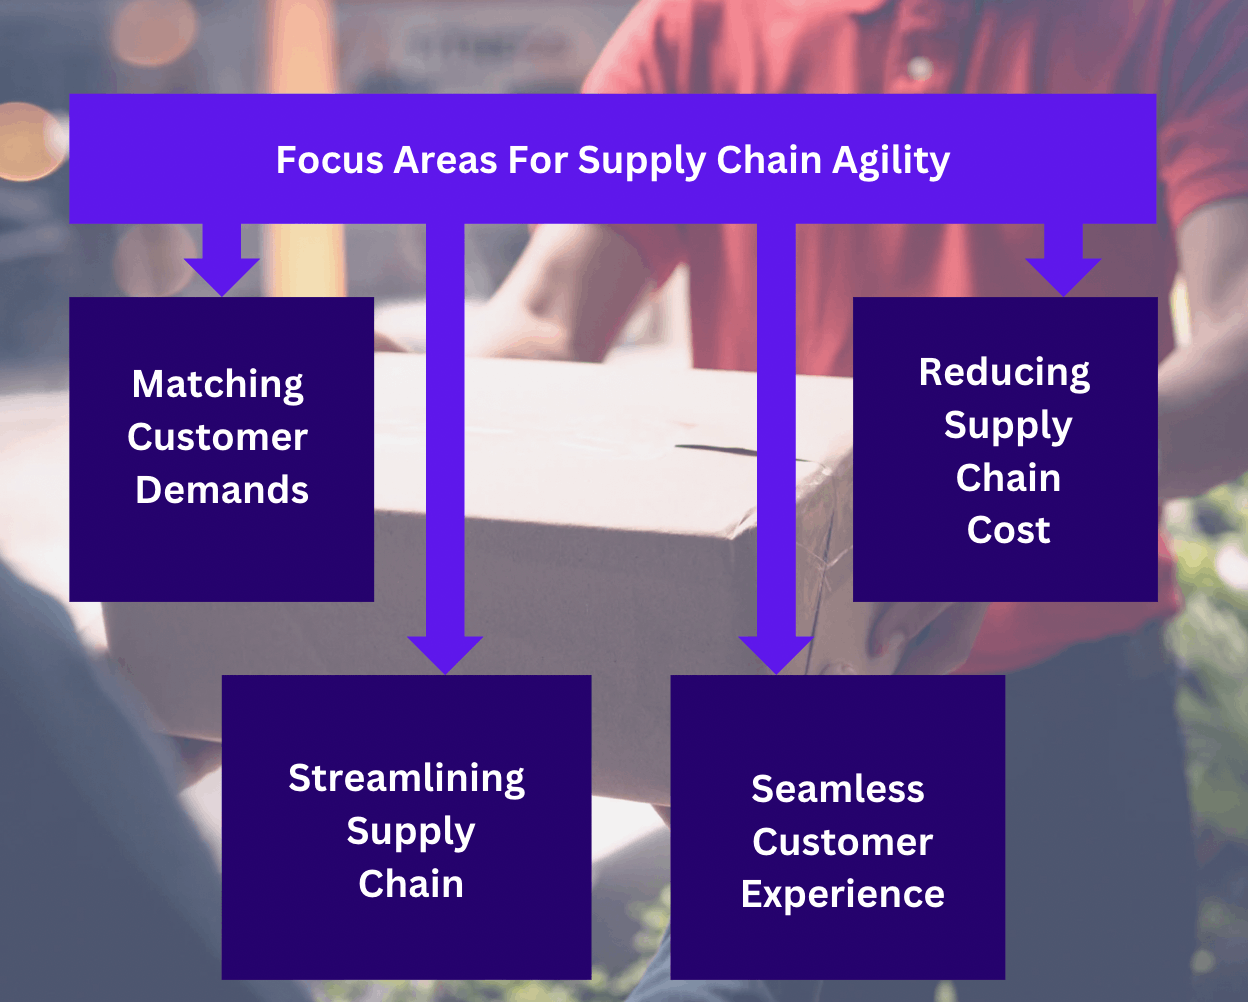 Focus areas for supply chain agility